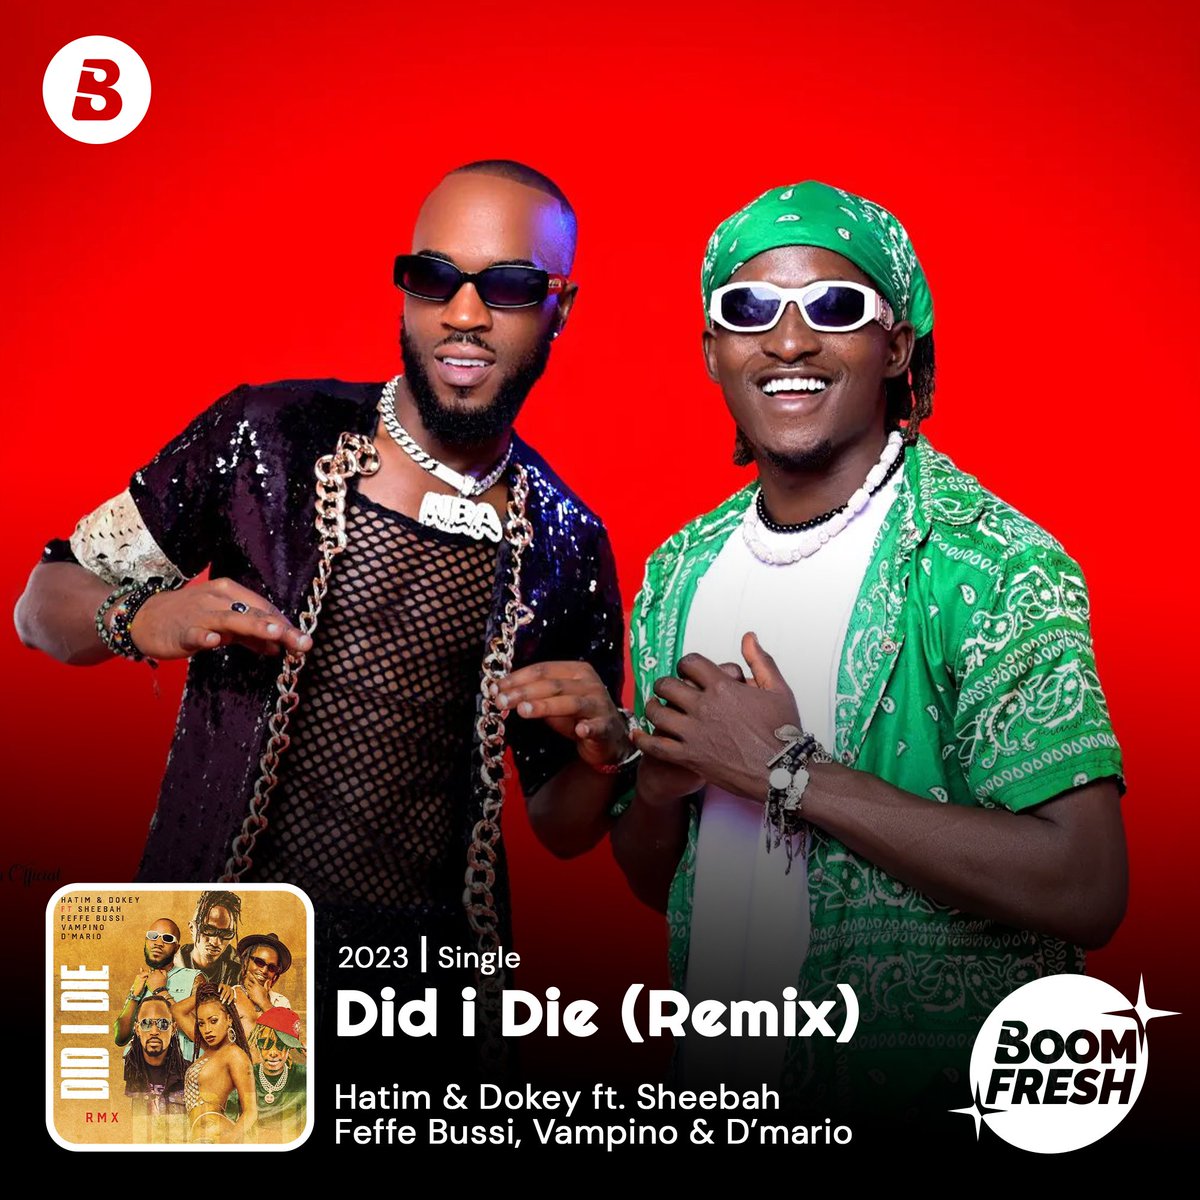 🚨BOOM FRESH🚨 The tune we've all been waiting for, here's #DidIDie the remix by @hatimanddokey featuring @Ksheebah1 , @FeffebussiMusic , @Vampinoxrated and D'Mario Check it out on #boomplay